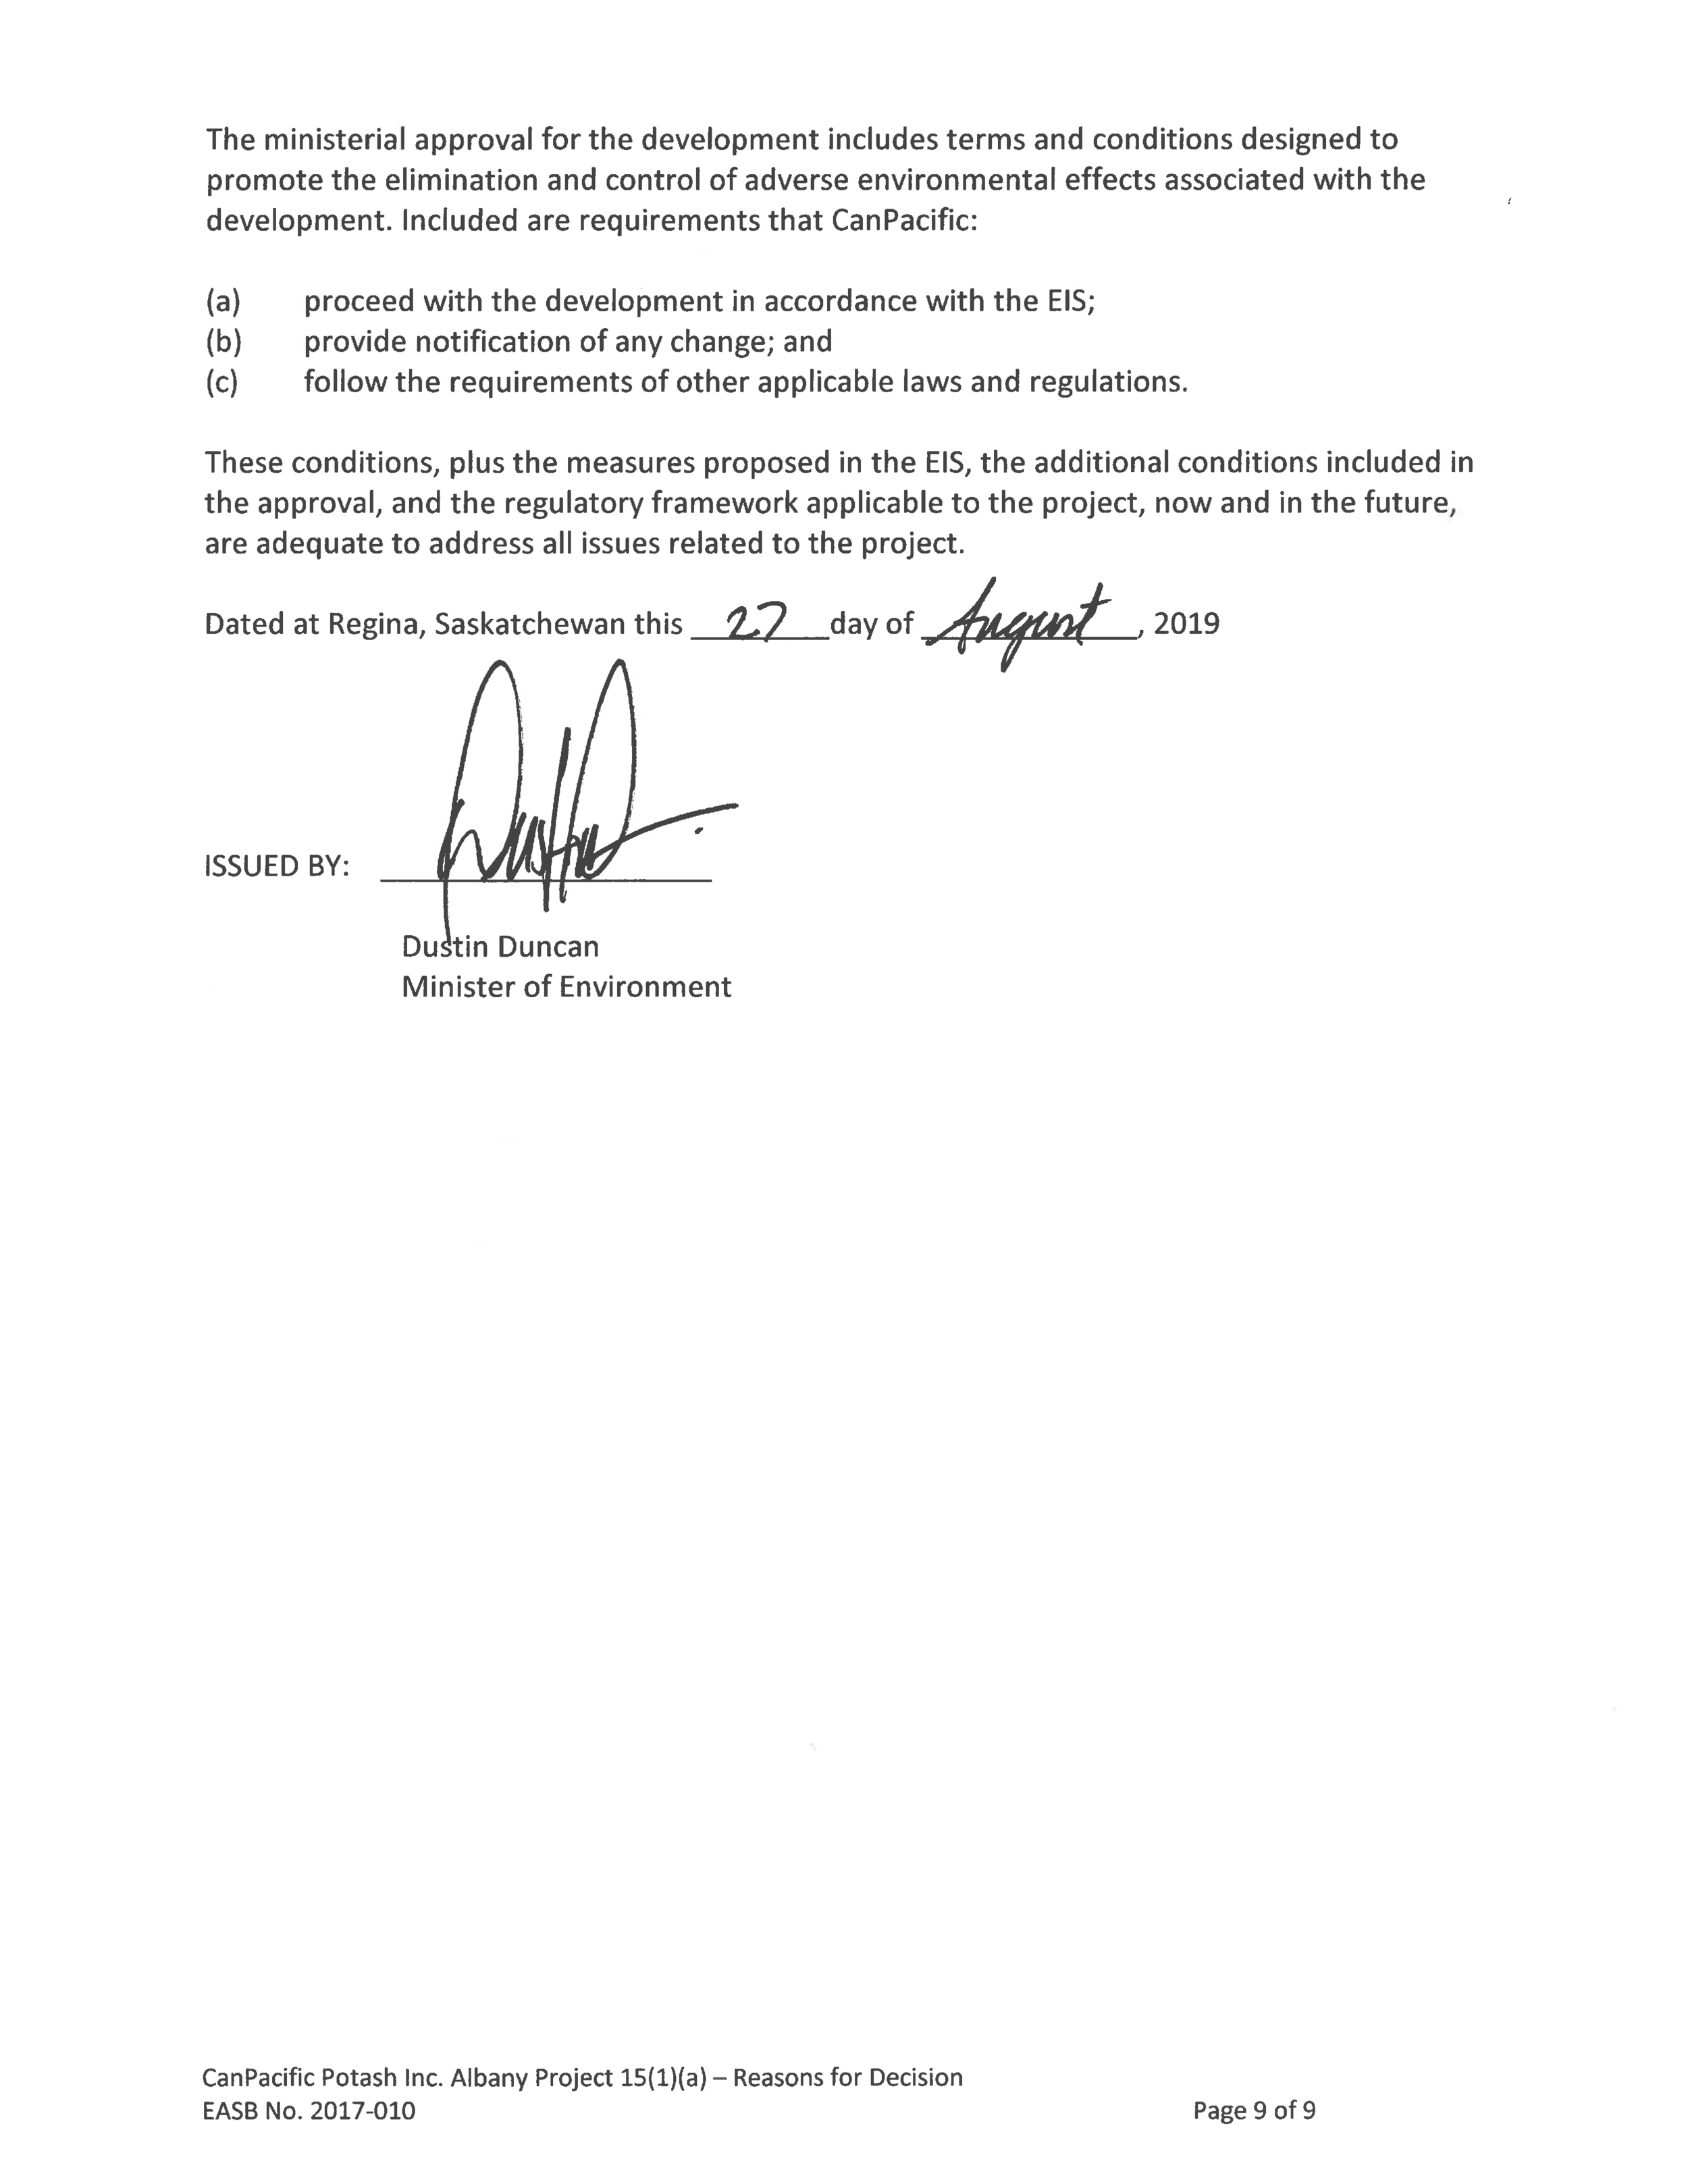 2017-010 Albany Project Decision_Signed (2)_Page_11.png